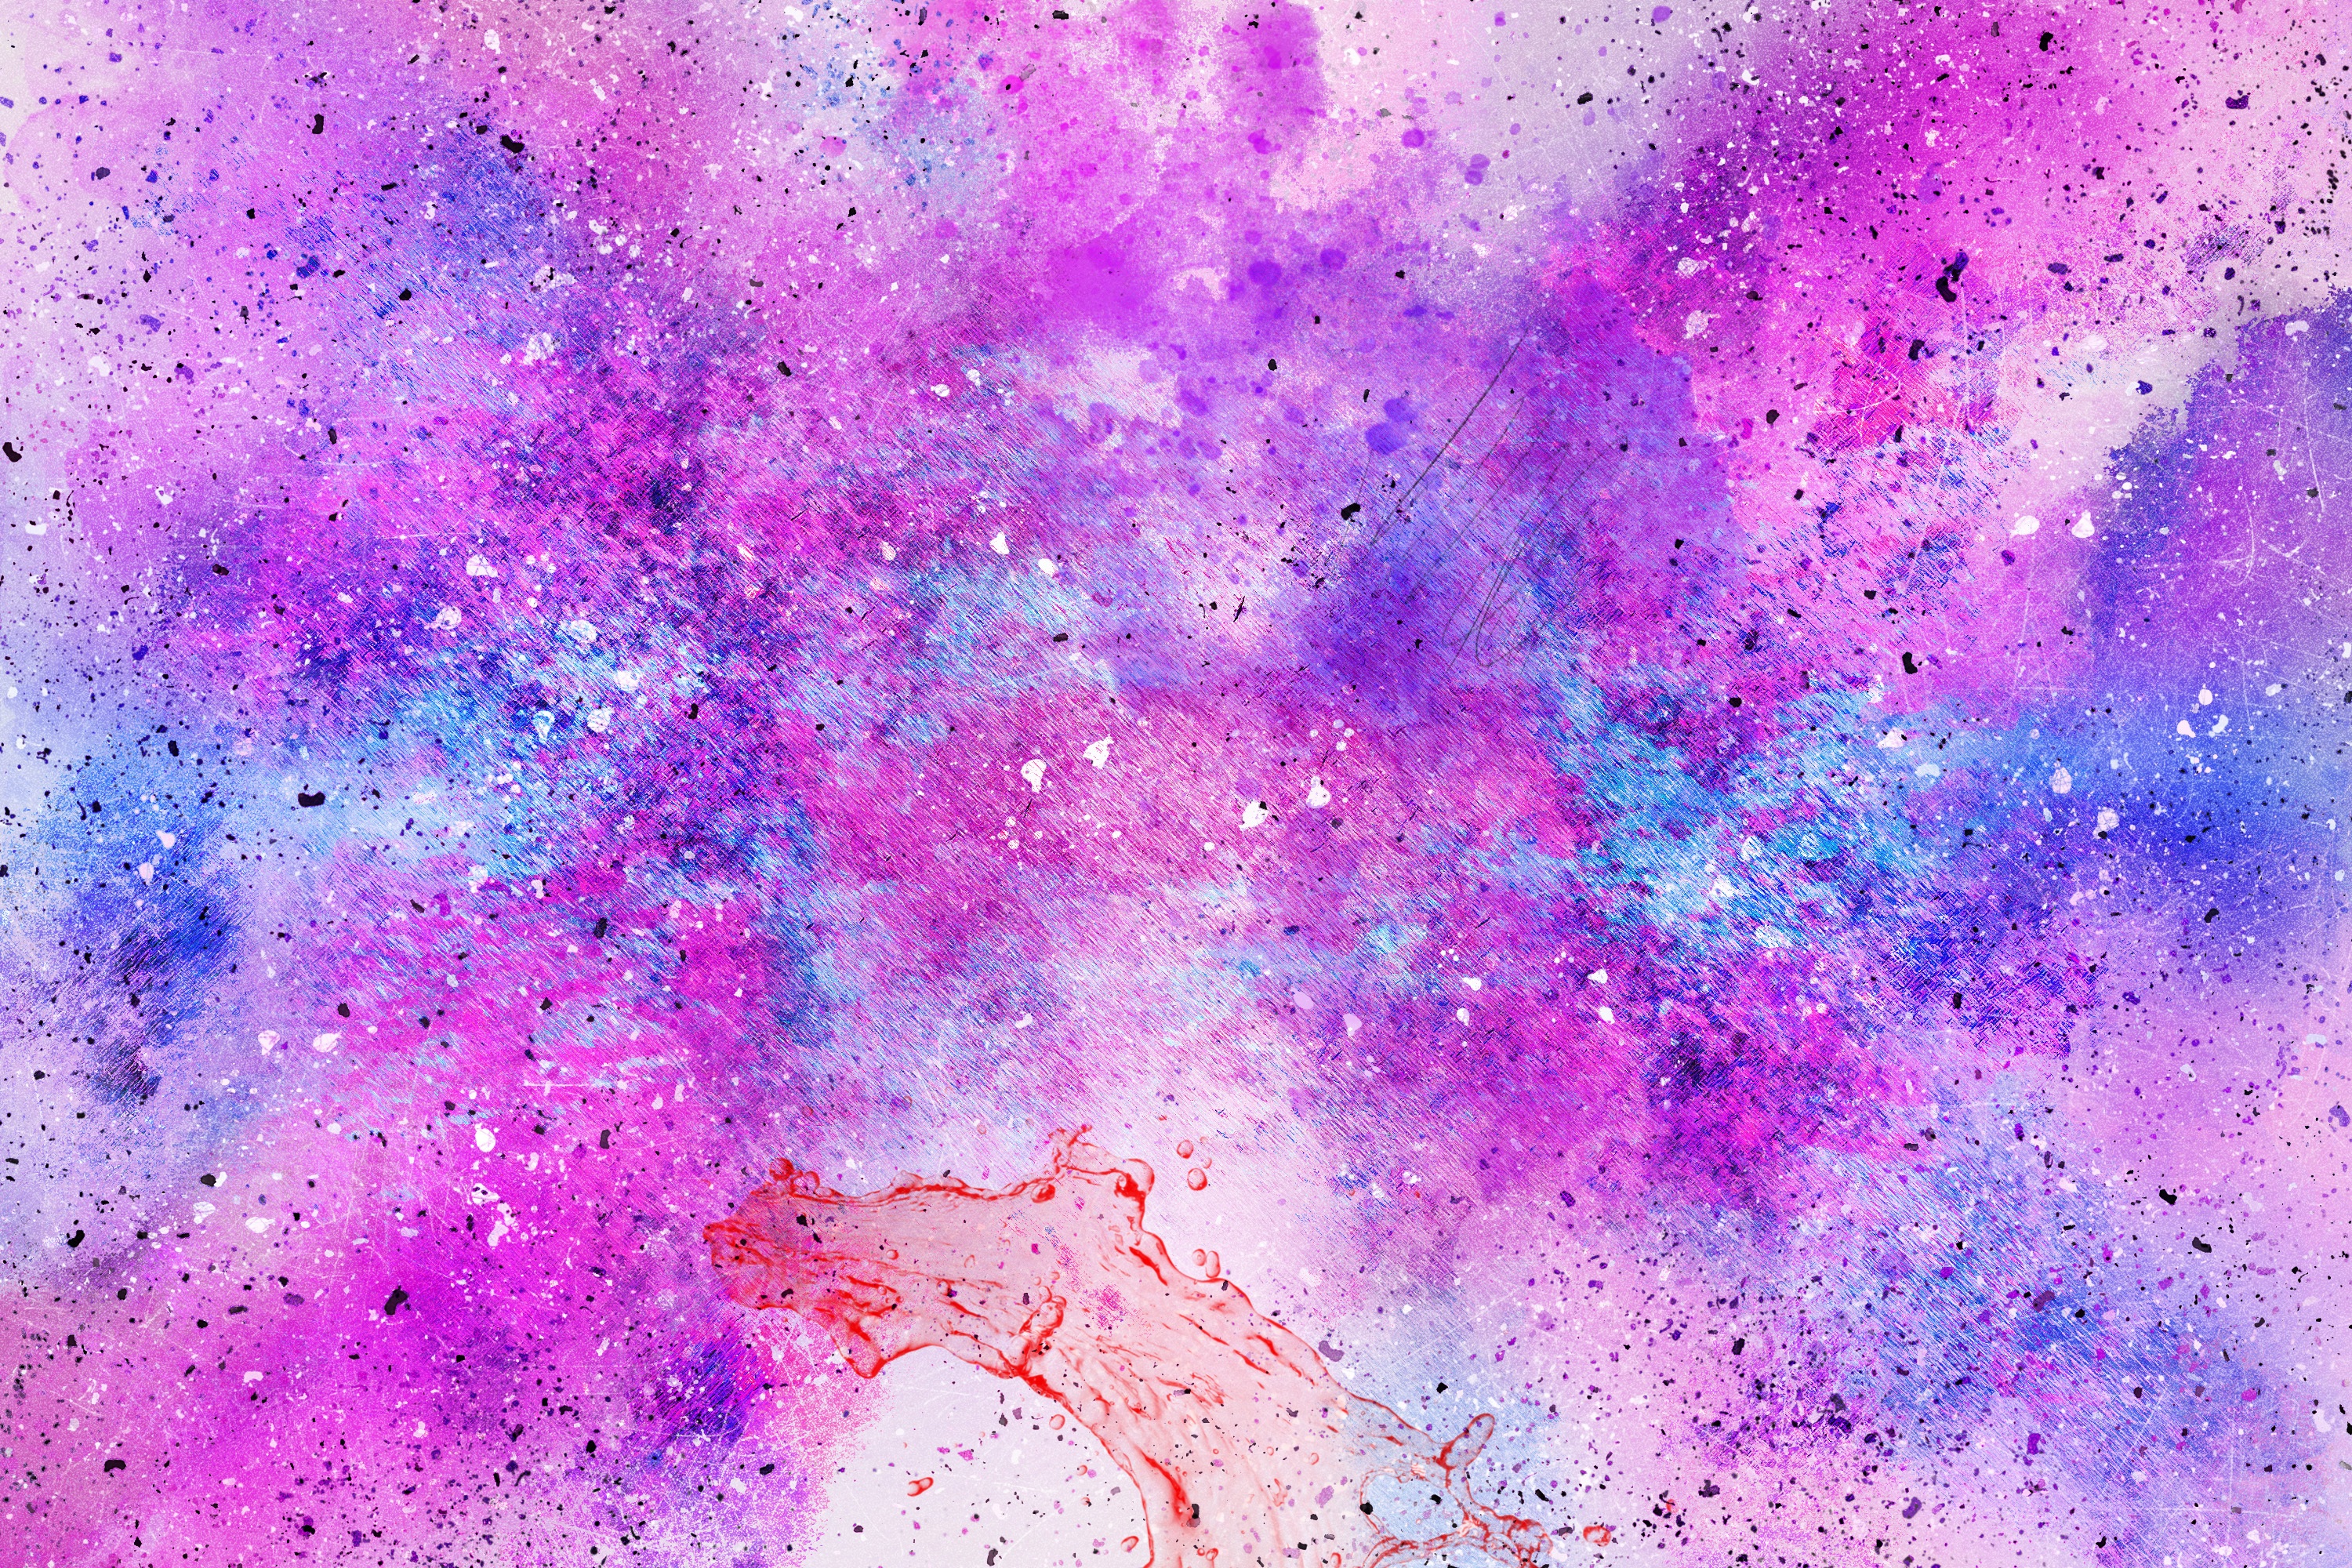 QHD wallpaper stains, abstract, pink, spots